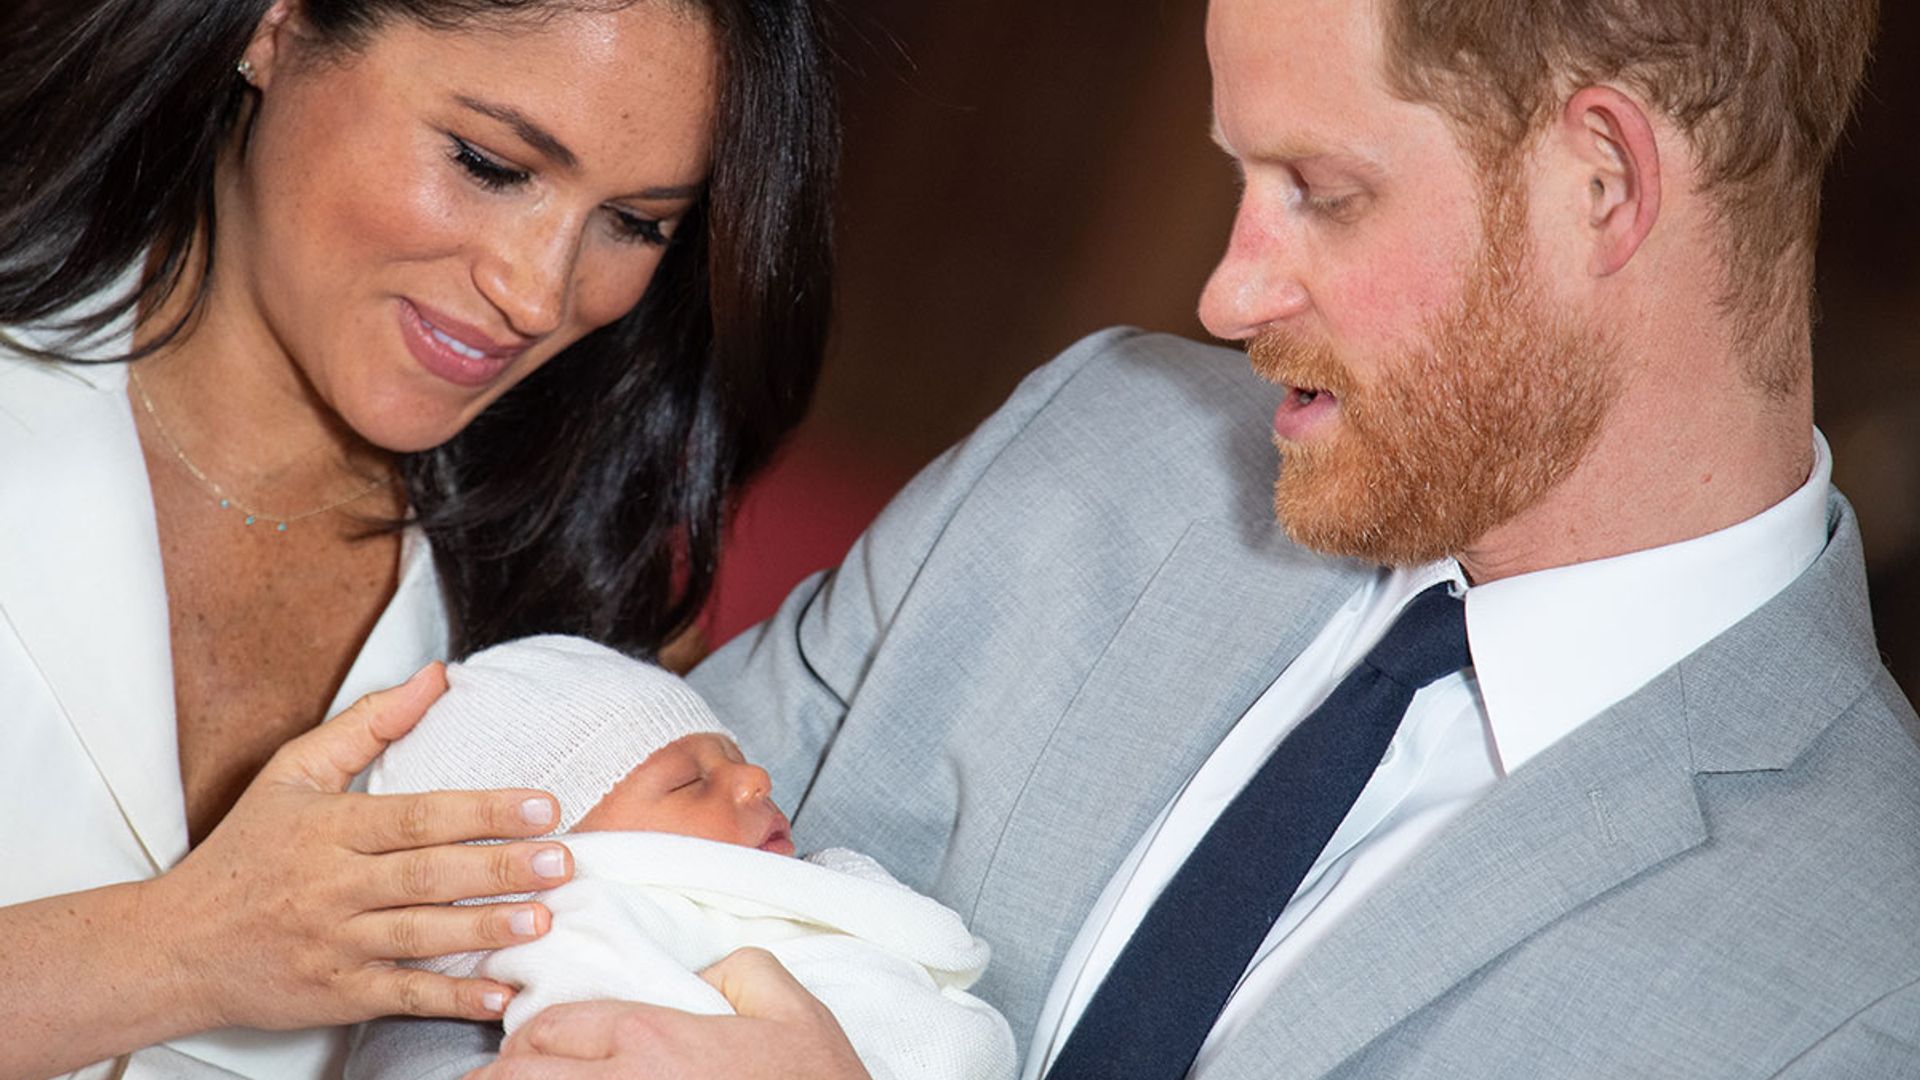 When will Prince Harry and Meghan Markle register baby Archie's birth?